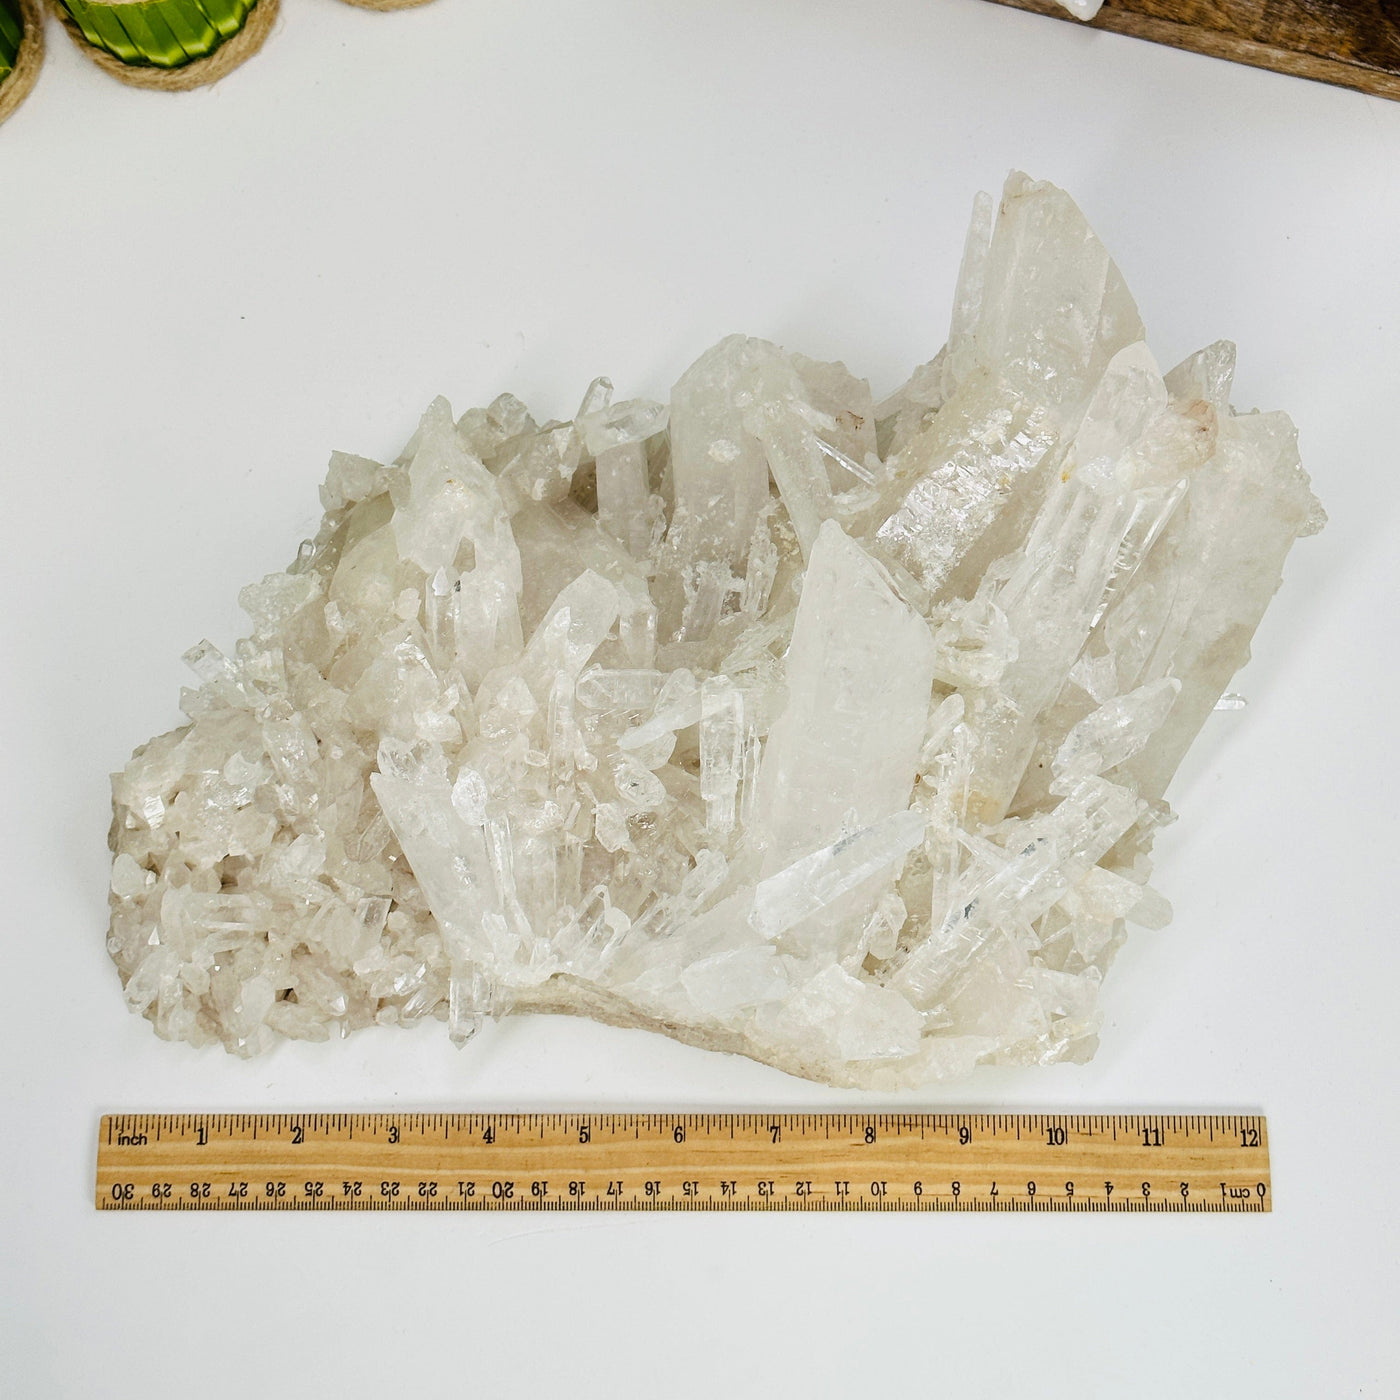 crystal quartz freeform next to a ruler for size reference